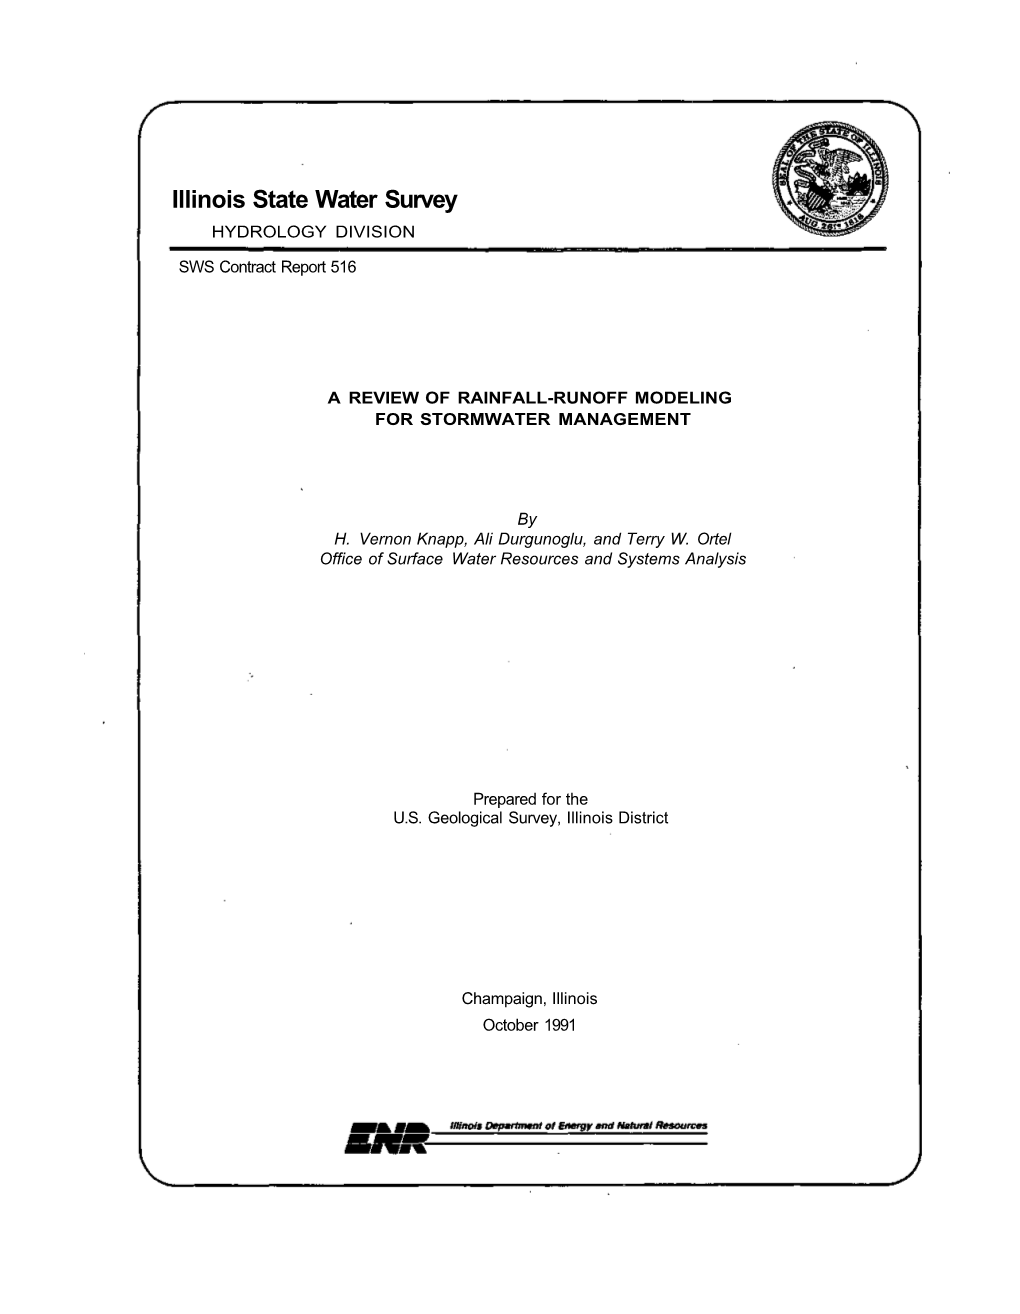 A Review of Rainfall-Runoff Modeling for Stormwater Management